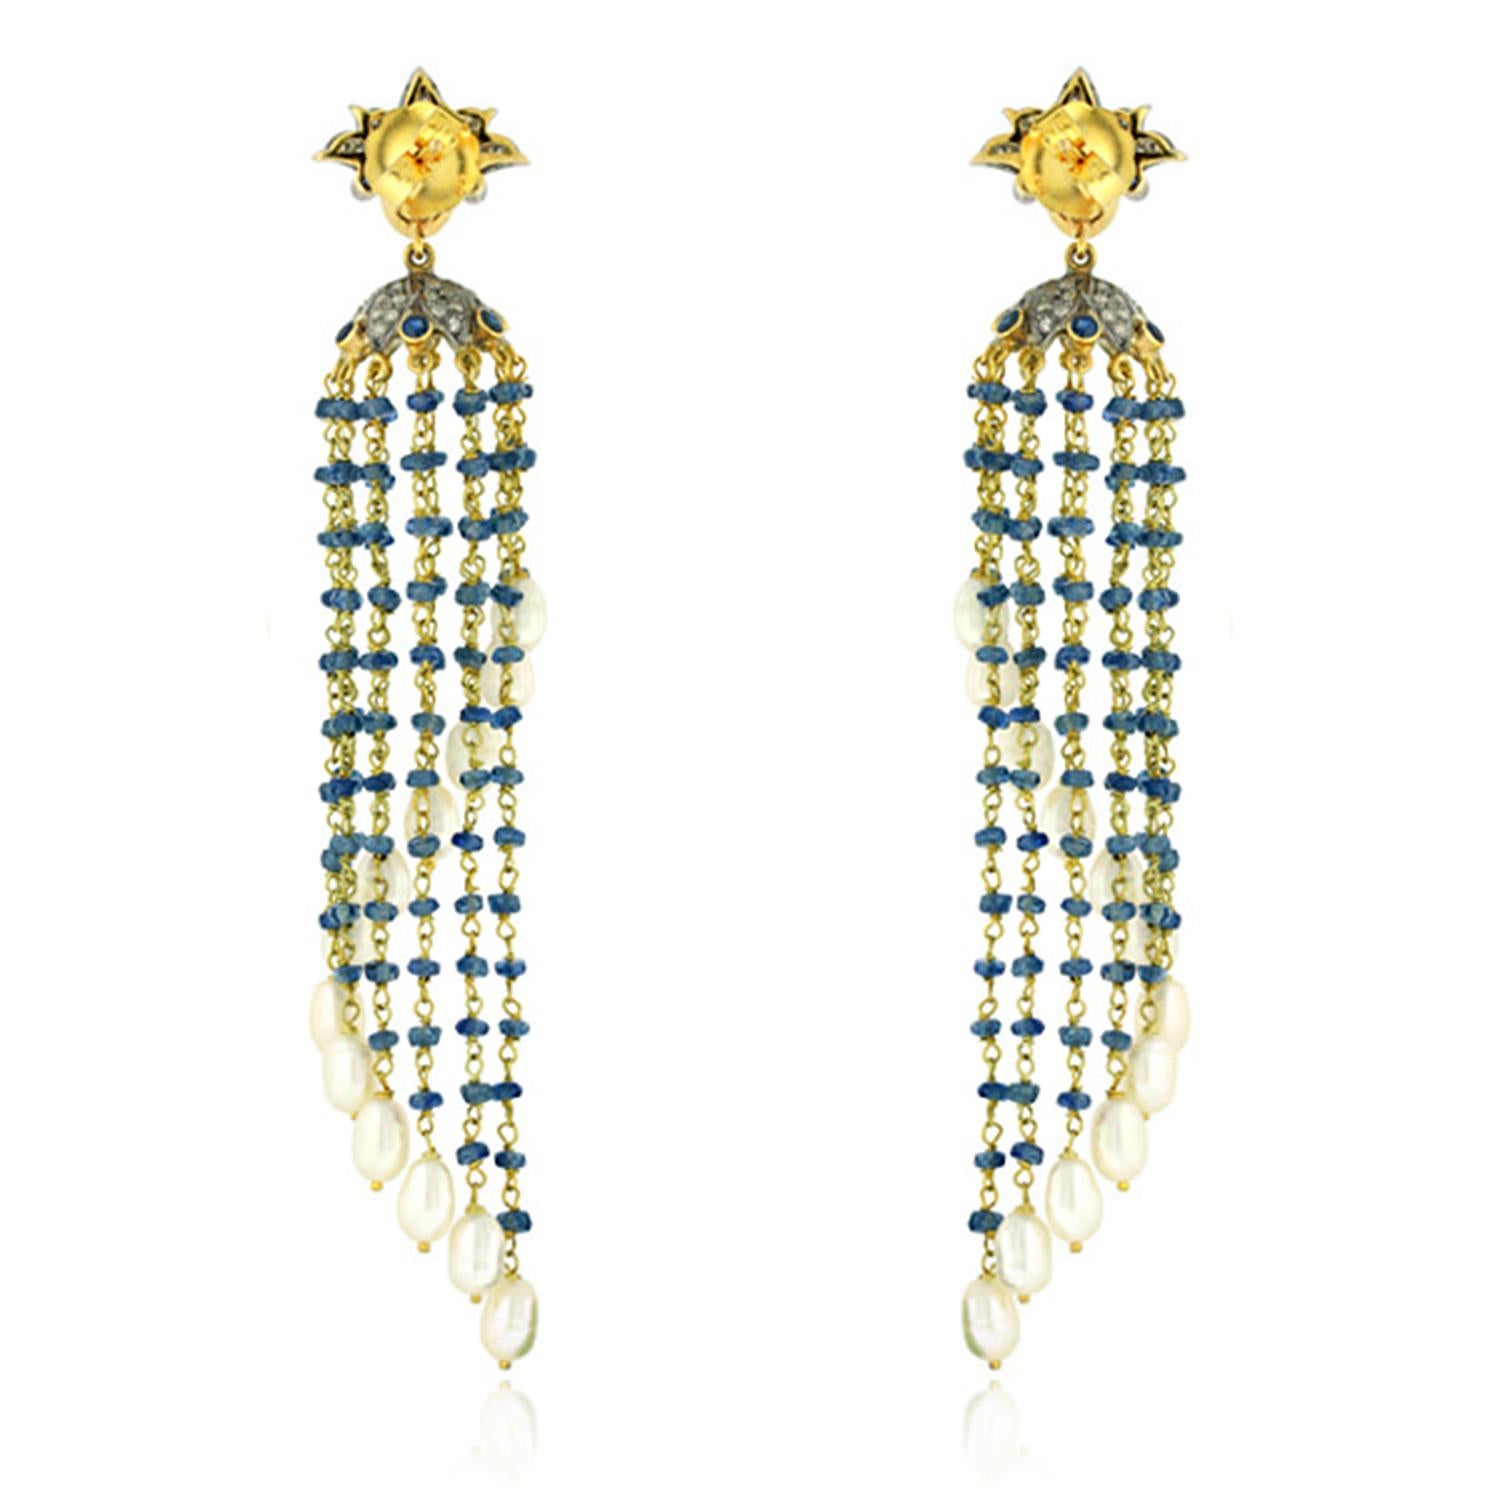 These tassel earrings are handmade in 14-karat gold & sterling silver. It is set in 21.5 carats pearl, 24.23 carats sapphire and .73 carats of diamonds. 

FOLLOW  MEGHNA JEWELS storefront to view the latest collection & exclusive pieces.  Meghna